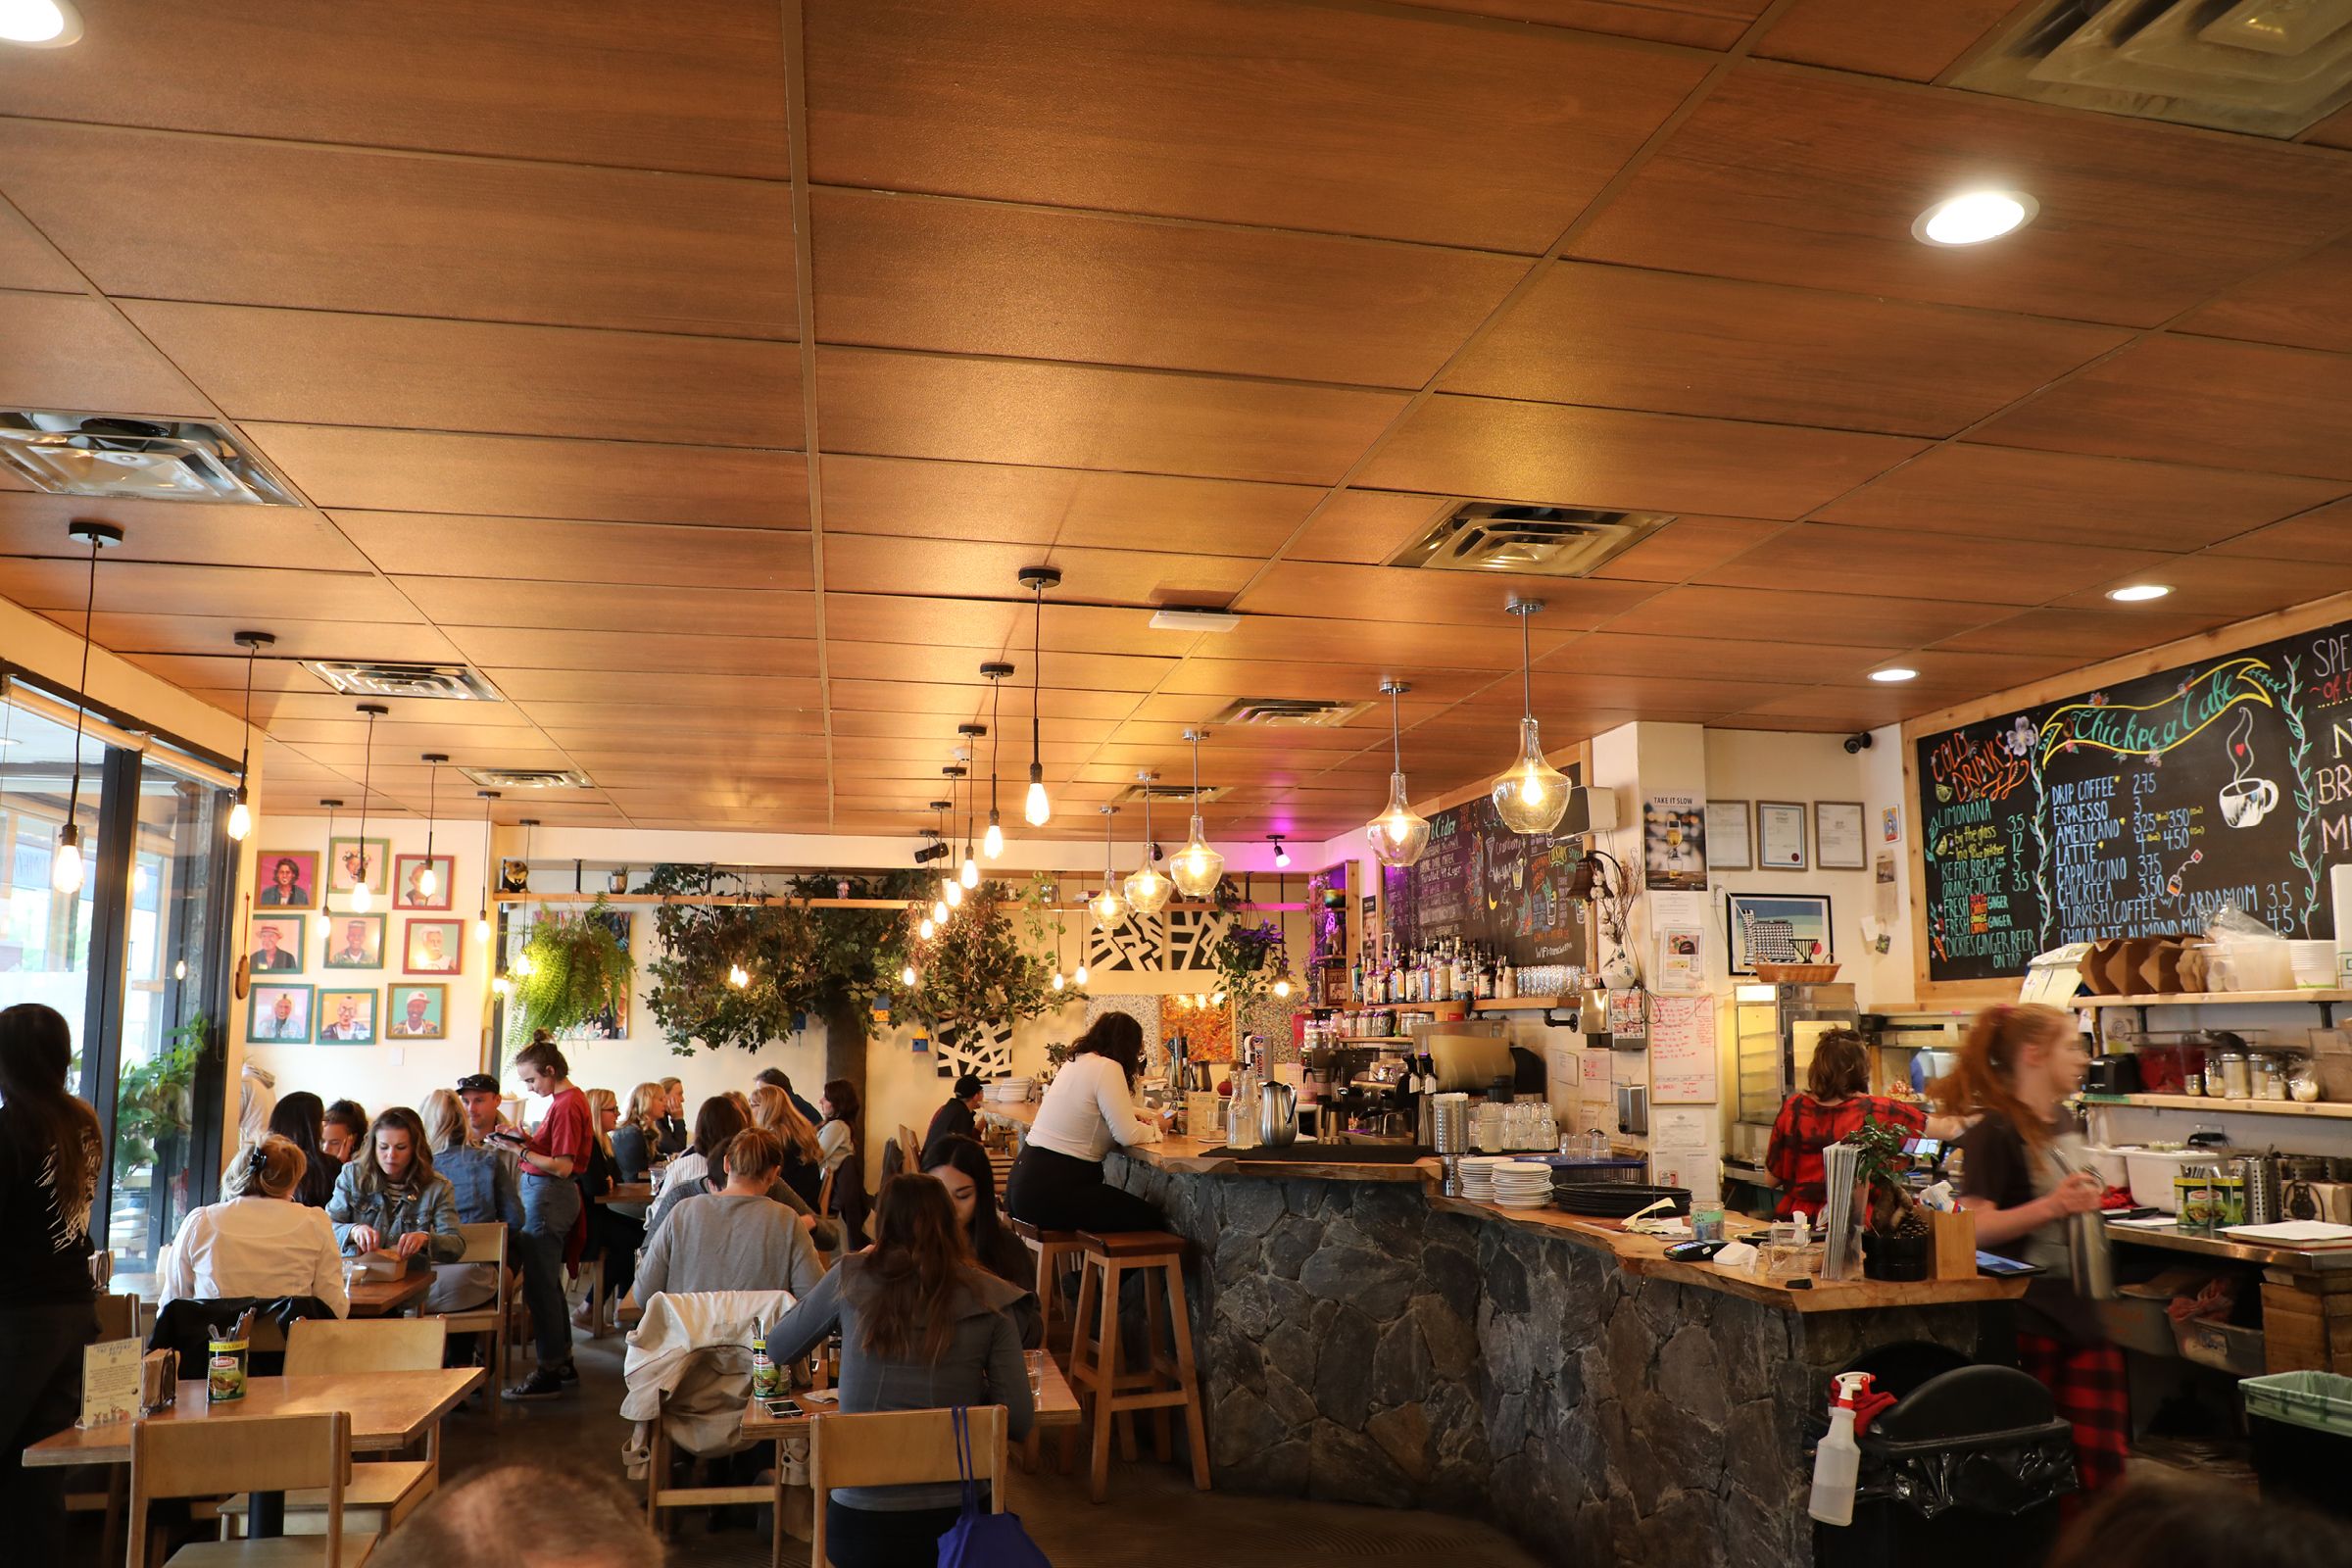 Busy Cafe with a brown, wood design acoustic T-bar ceiling.